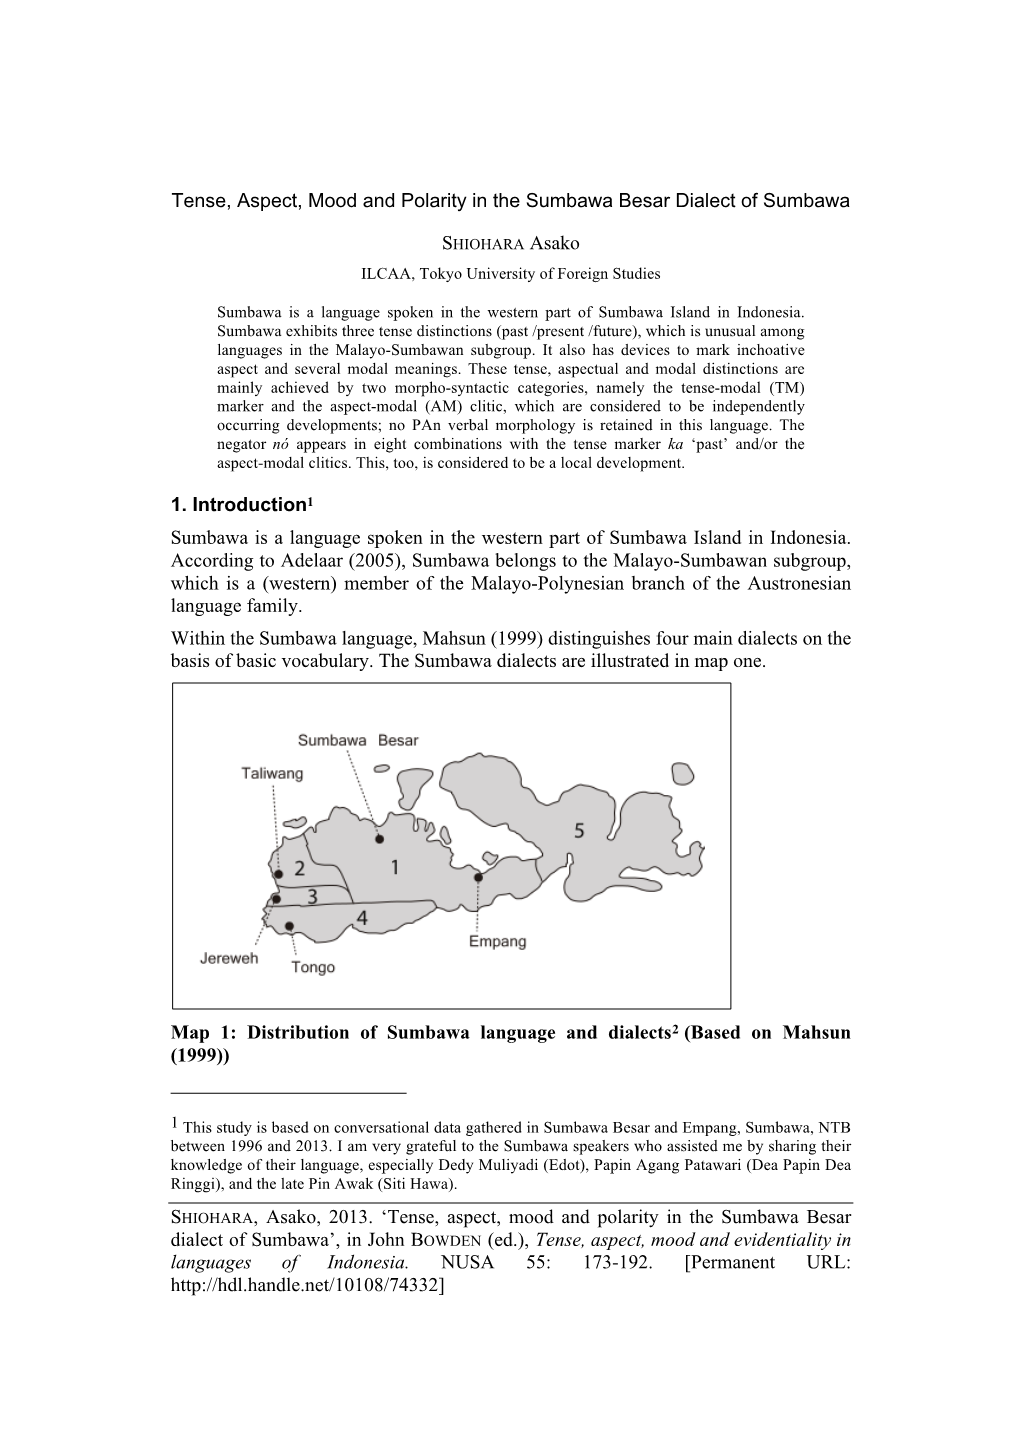 'Tense, Aspect, Mood and Polarity in the Sumbawa Besar Dialect Of